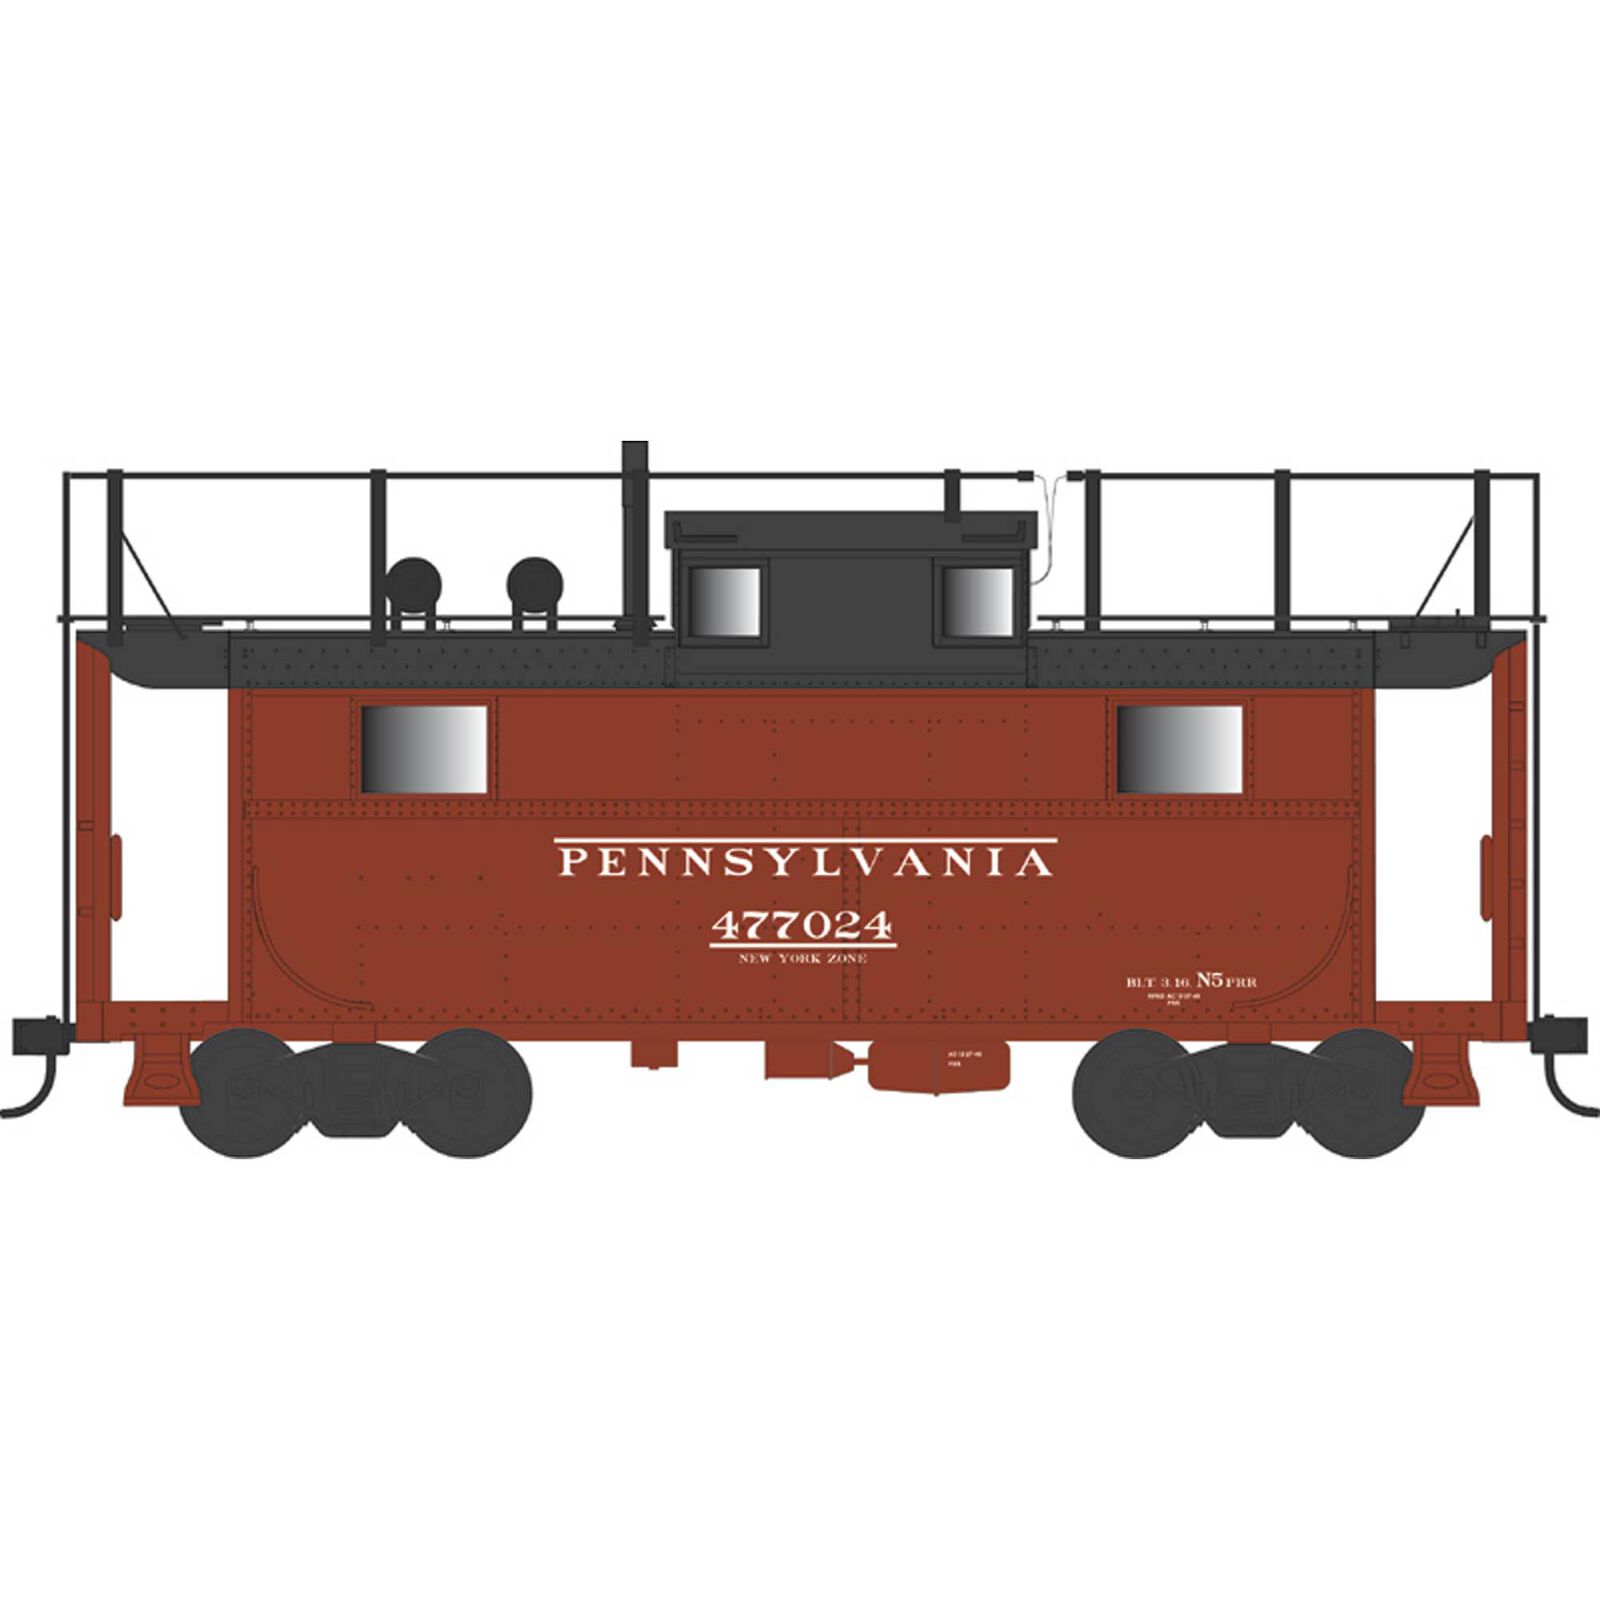 HO N5 Caboose, PRR NY Zone with with Trainphone #477017